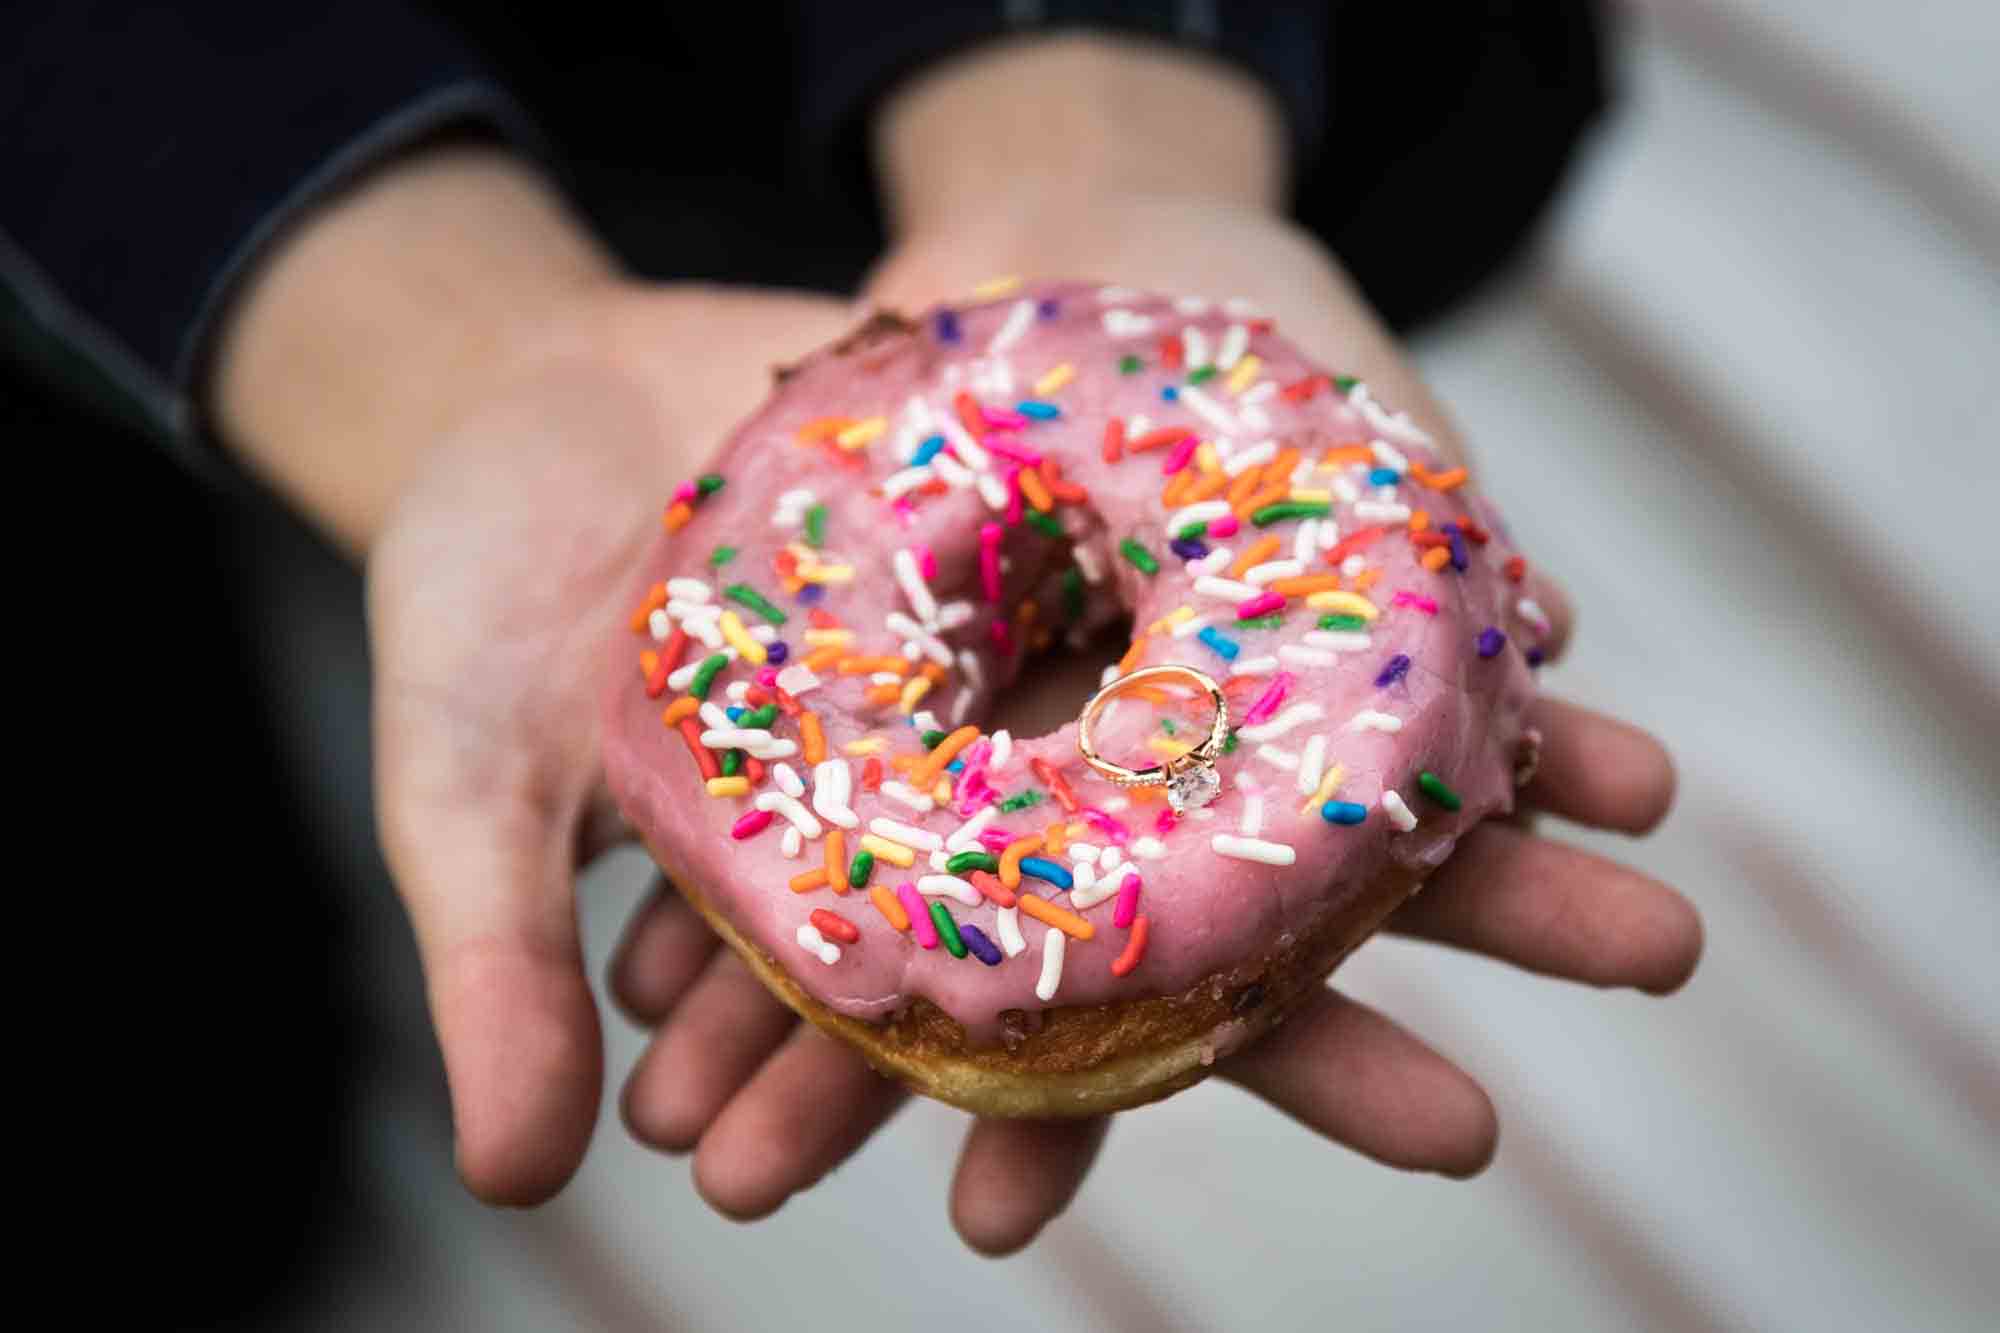 Man's hands offering engagement ring on top of doughnut covered in pink glaze and colorful sprinkles